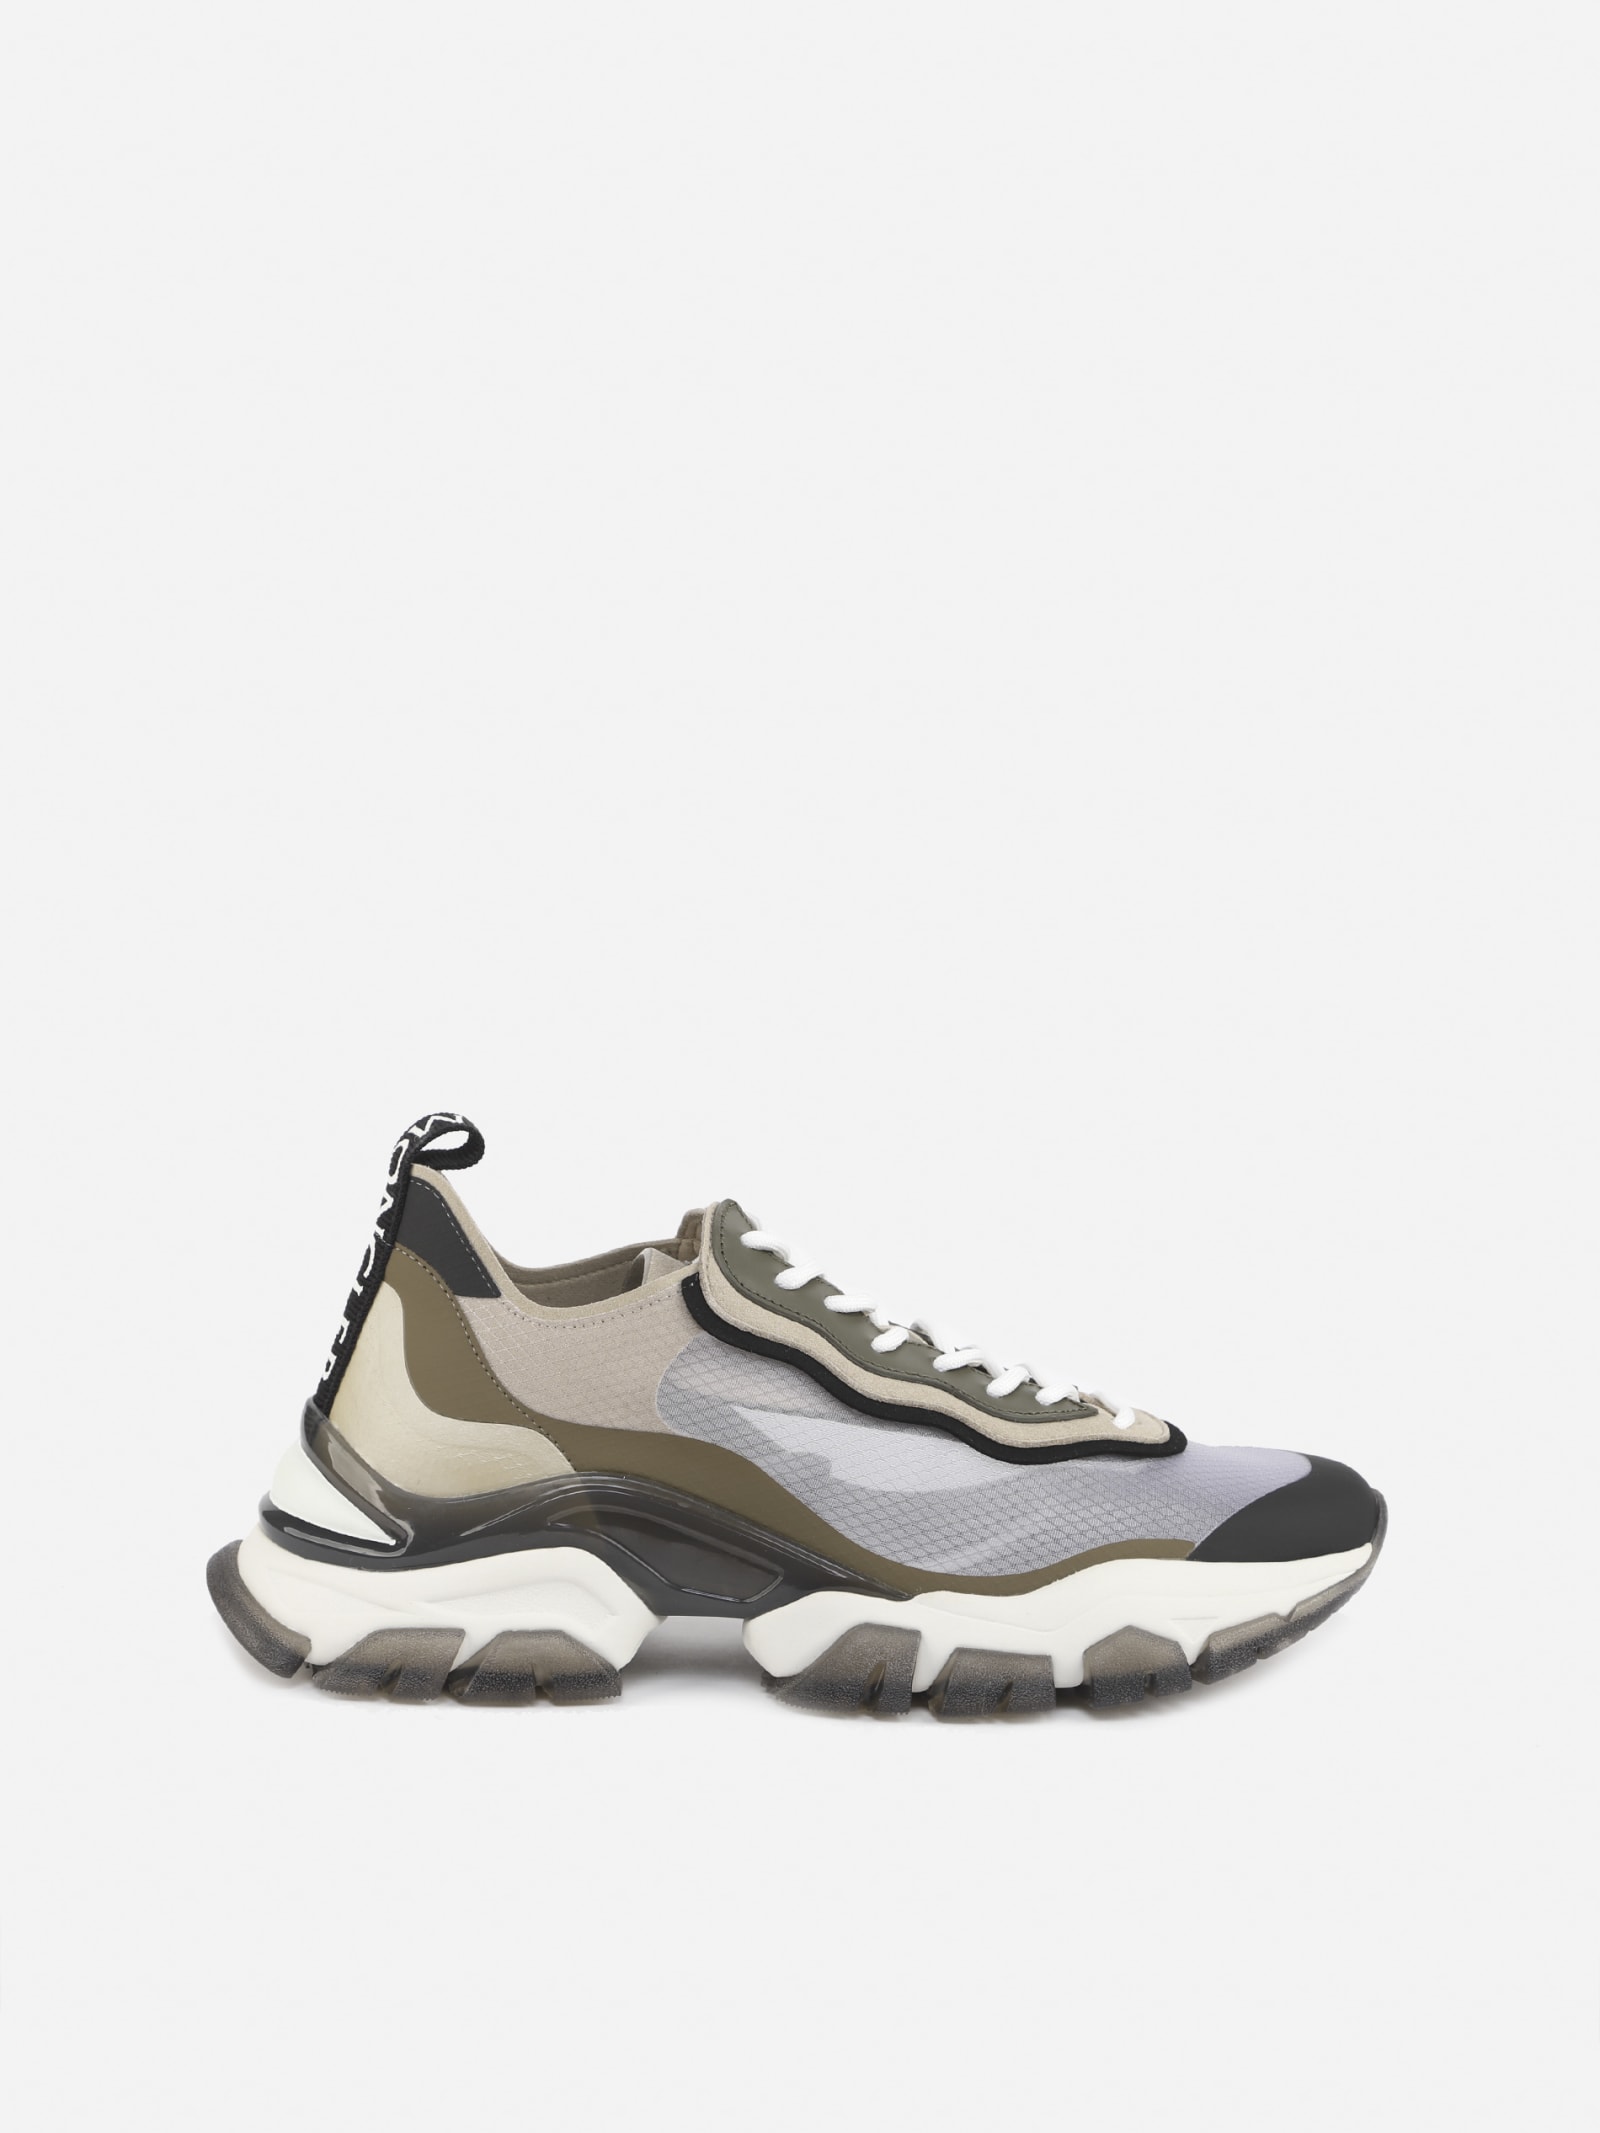 Moncler Leave No Trace Light Sneakers In Leather In Beige